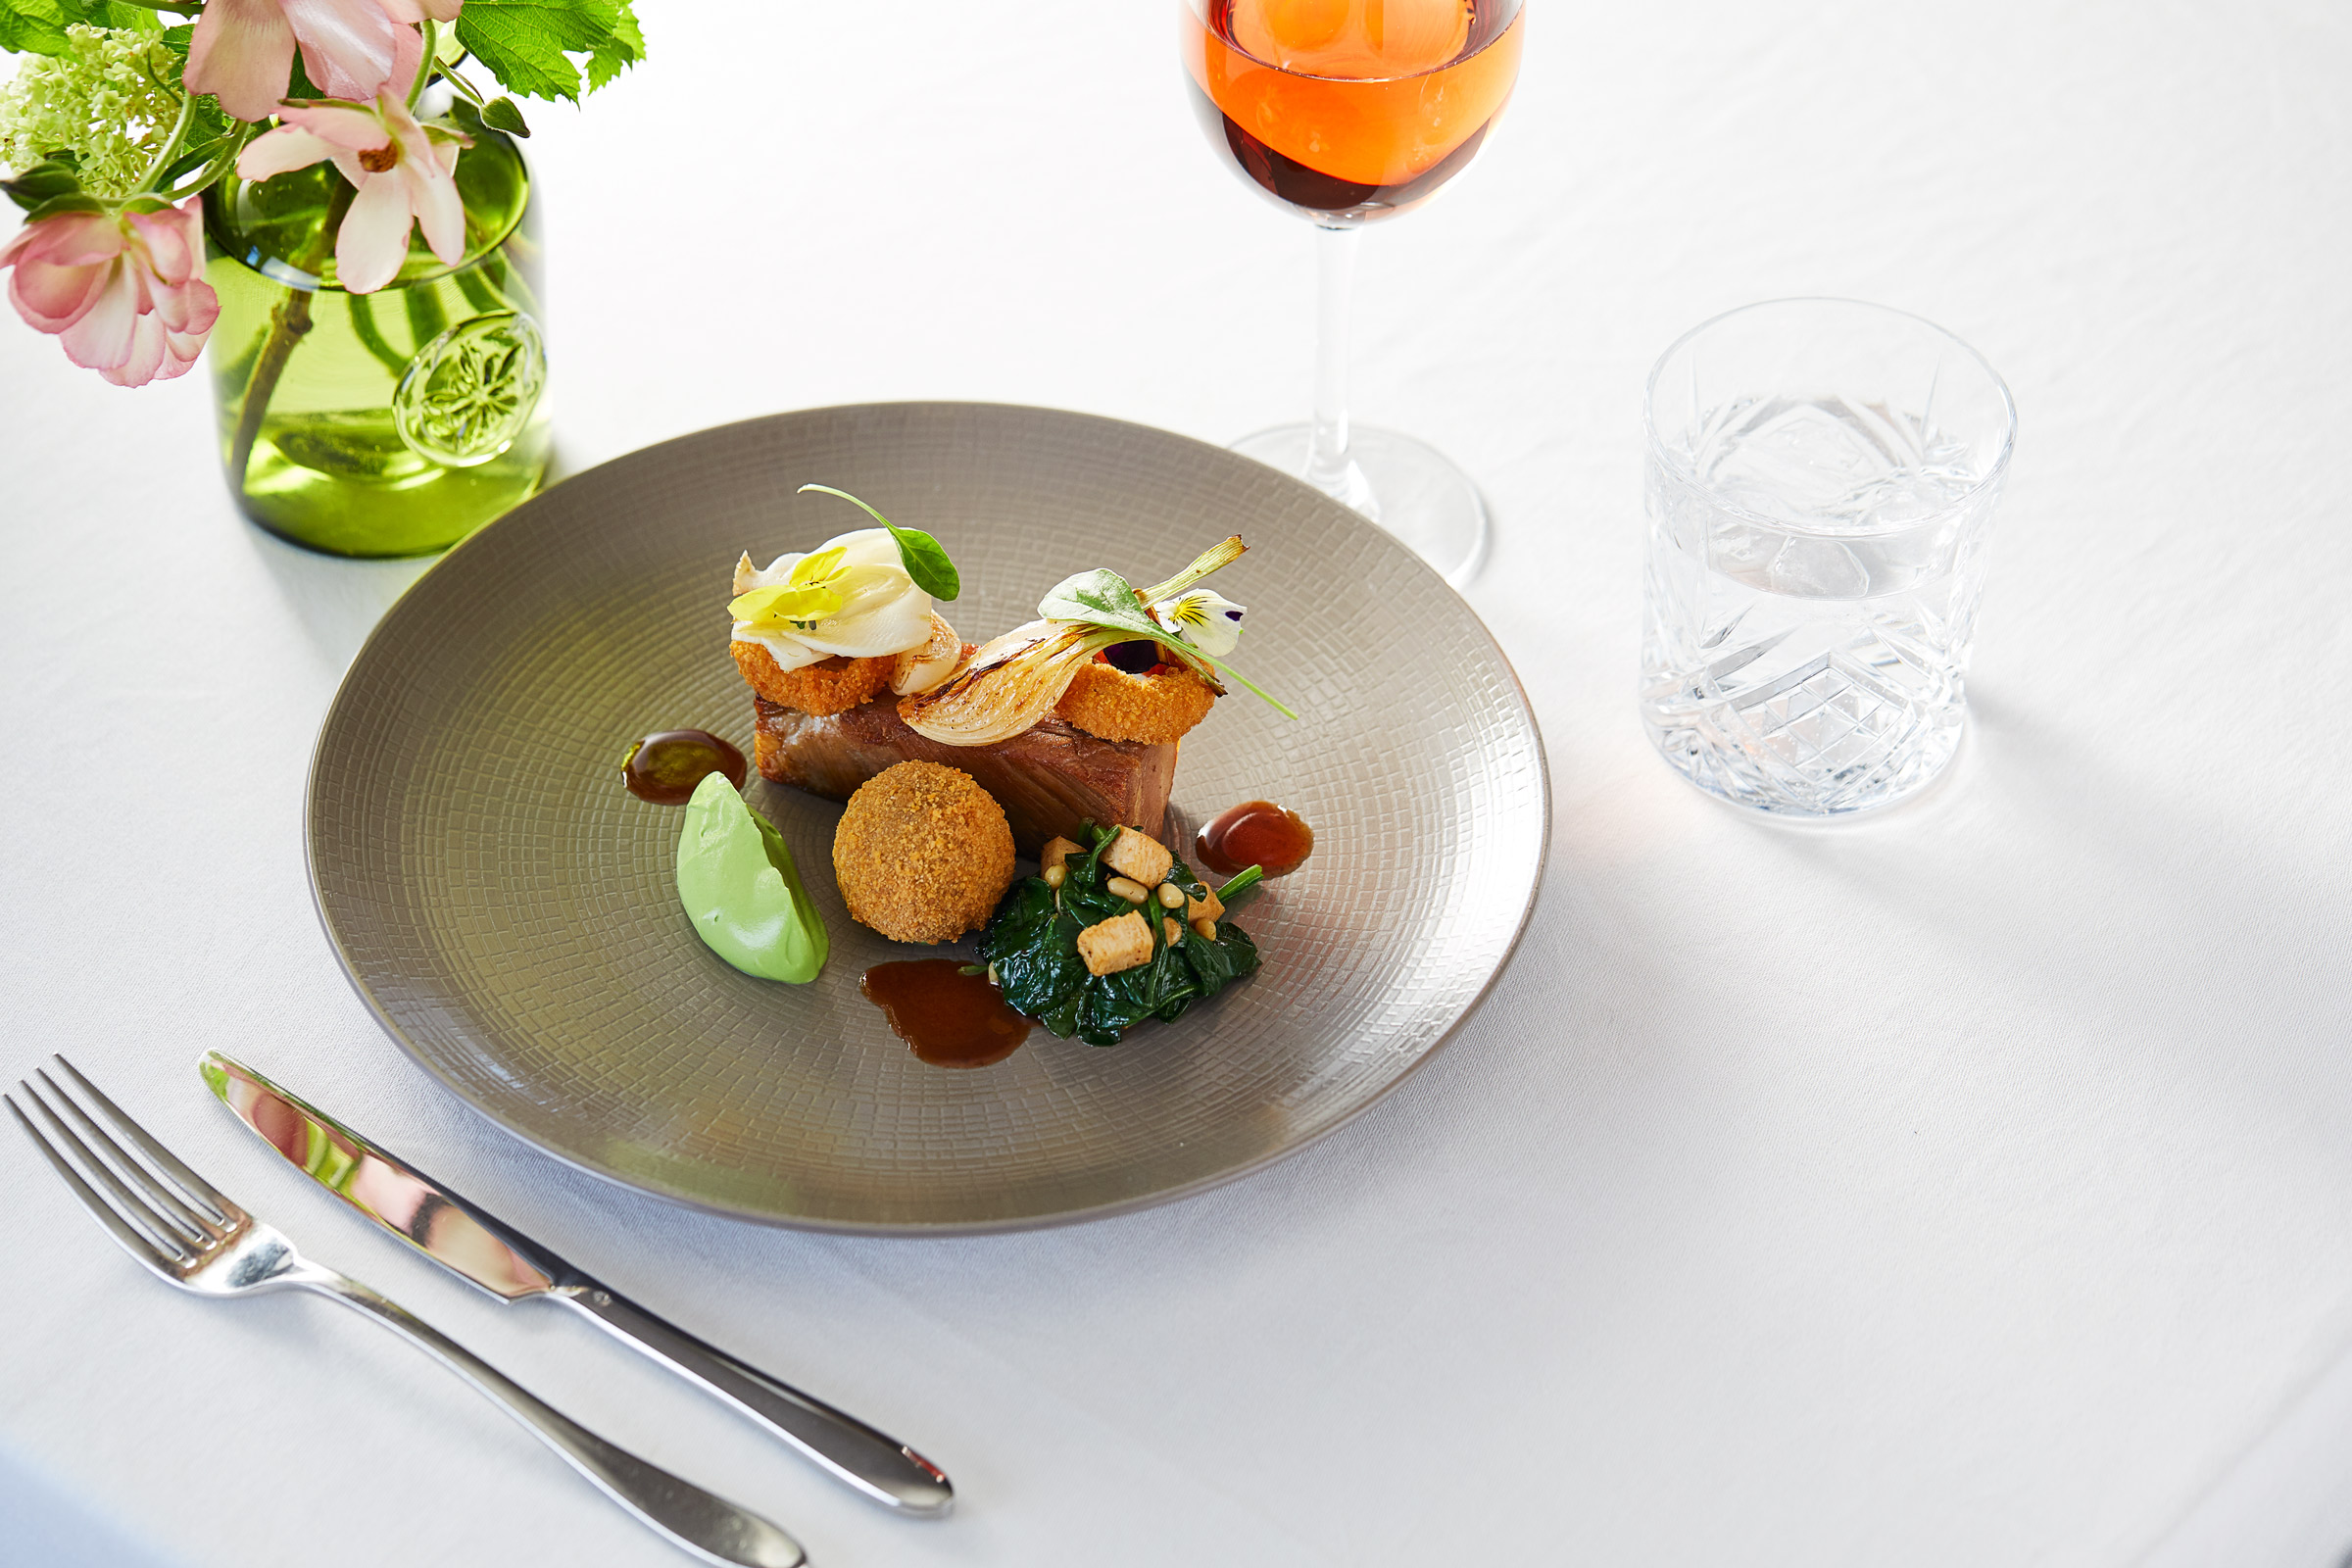 Pork Belly from the tasting menu at Macdonald Drumossie Hotel Inverness. Alastair Ferrier photographer.